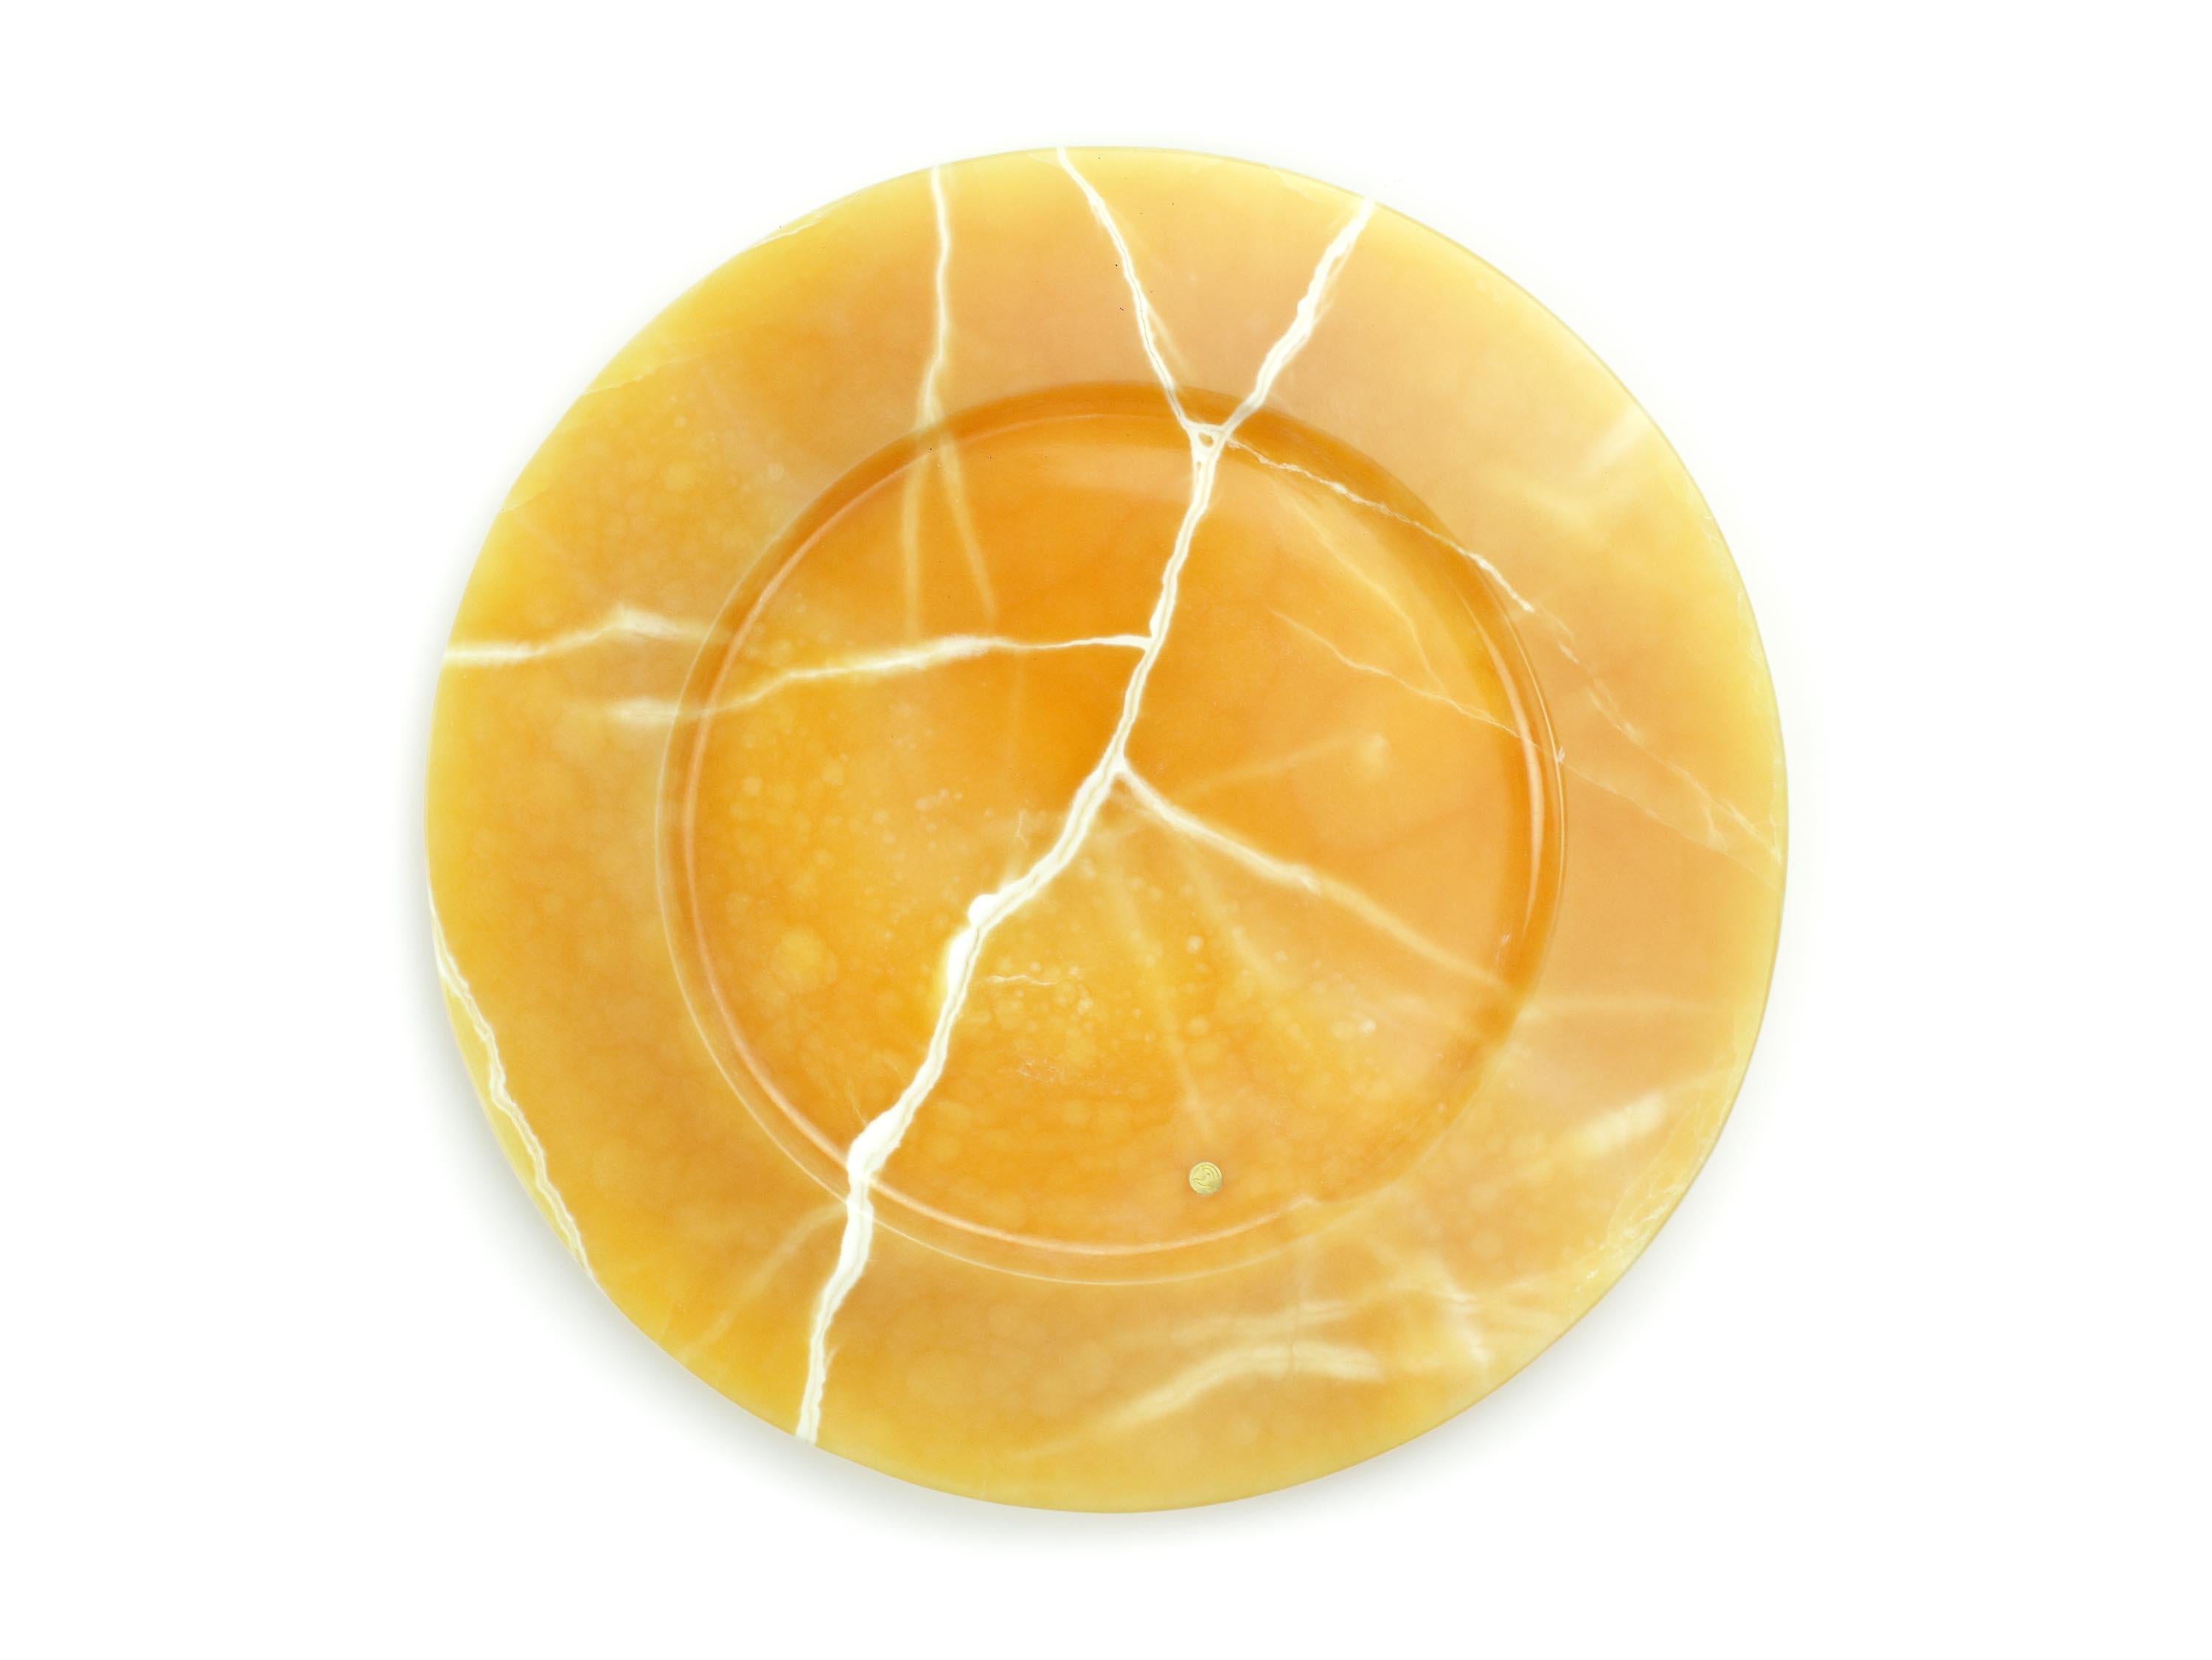 Charger Plate Platters Serveware Orange Set Onyx Marble Handmade Collectible In New Condition For Sale In Ancona, Marche